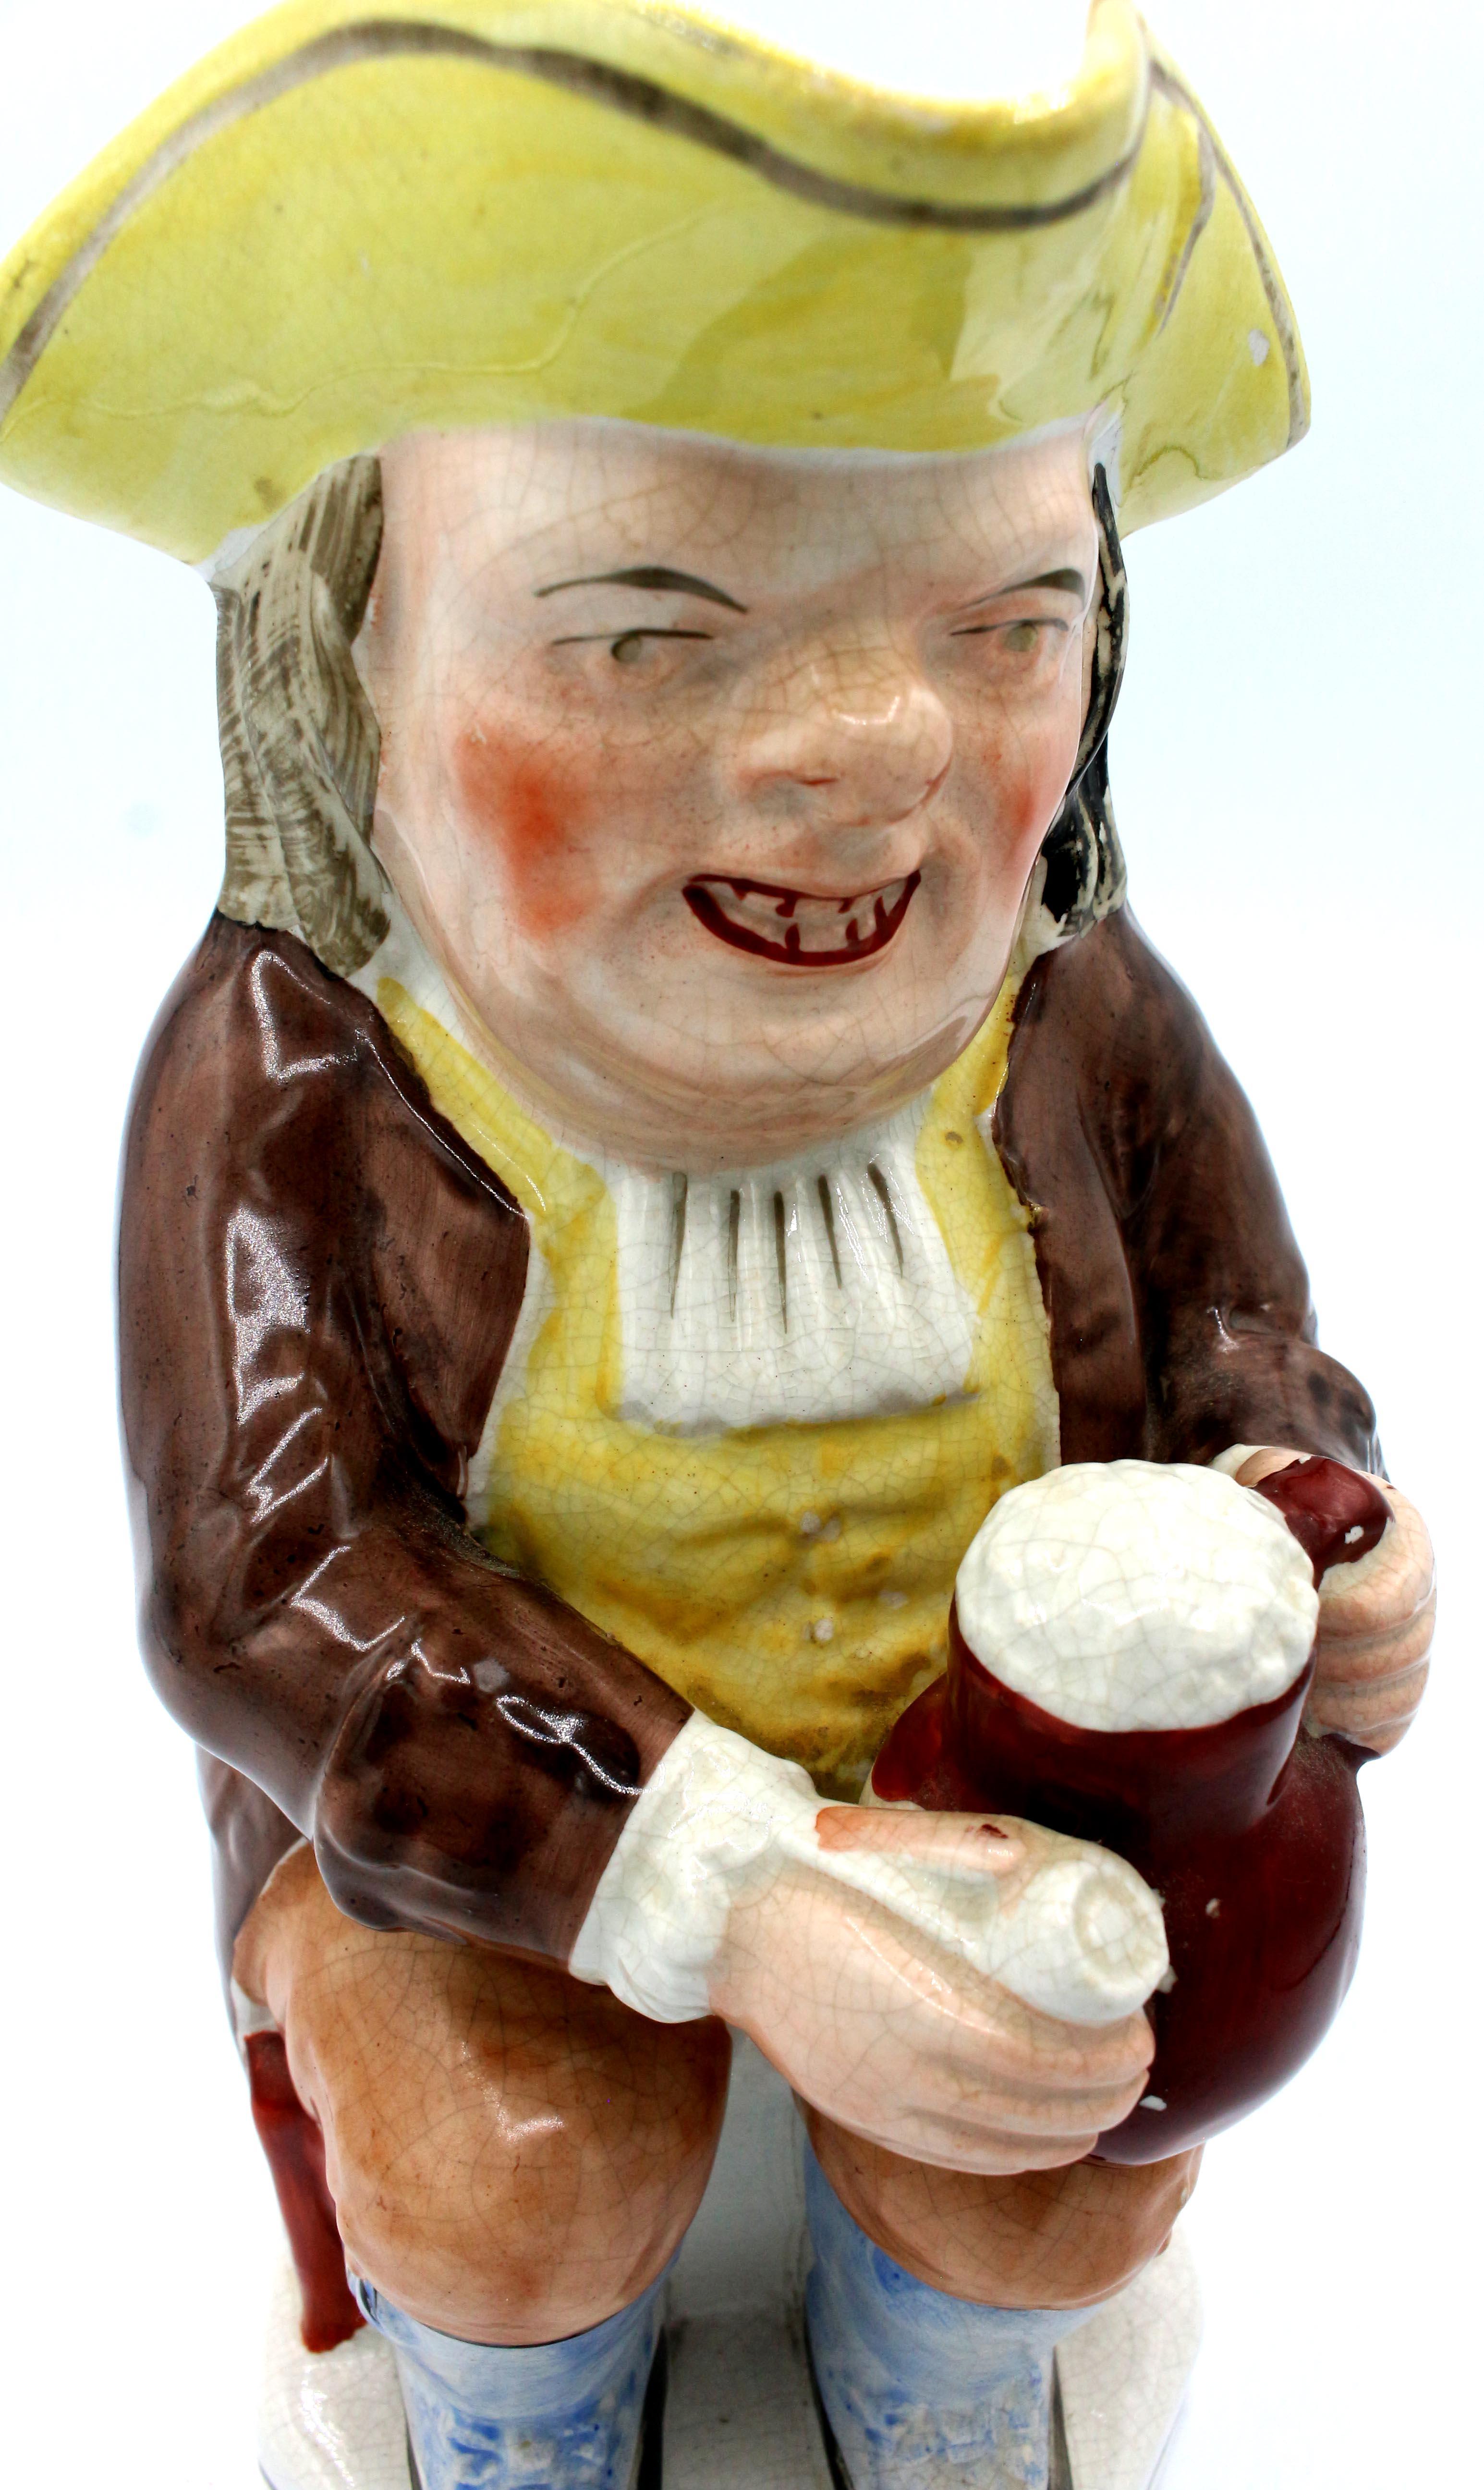 The Drunken Parson with White Clerical Collar Toby Jug, Angleterre, vers 1880 en vente 1